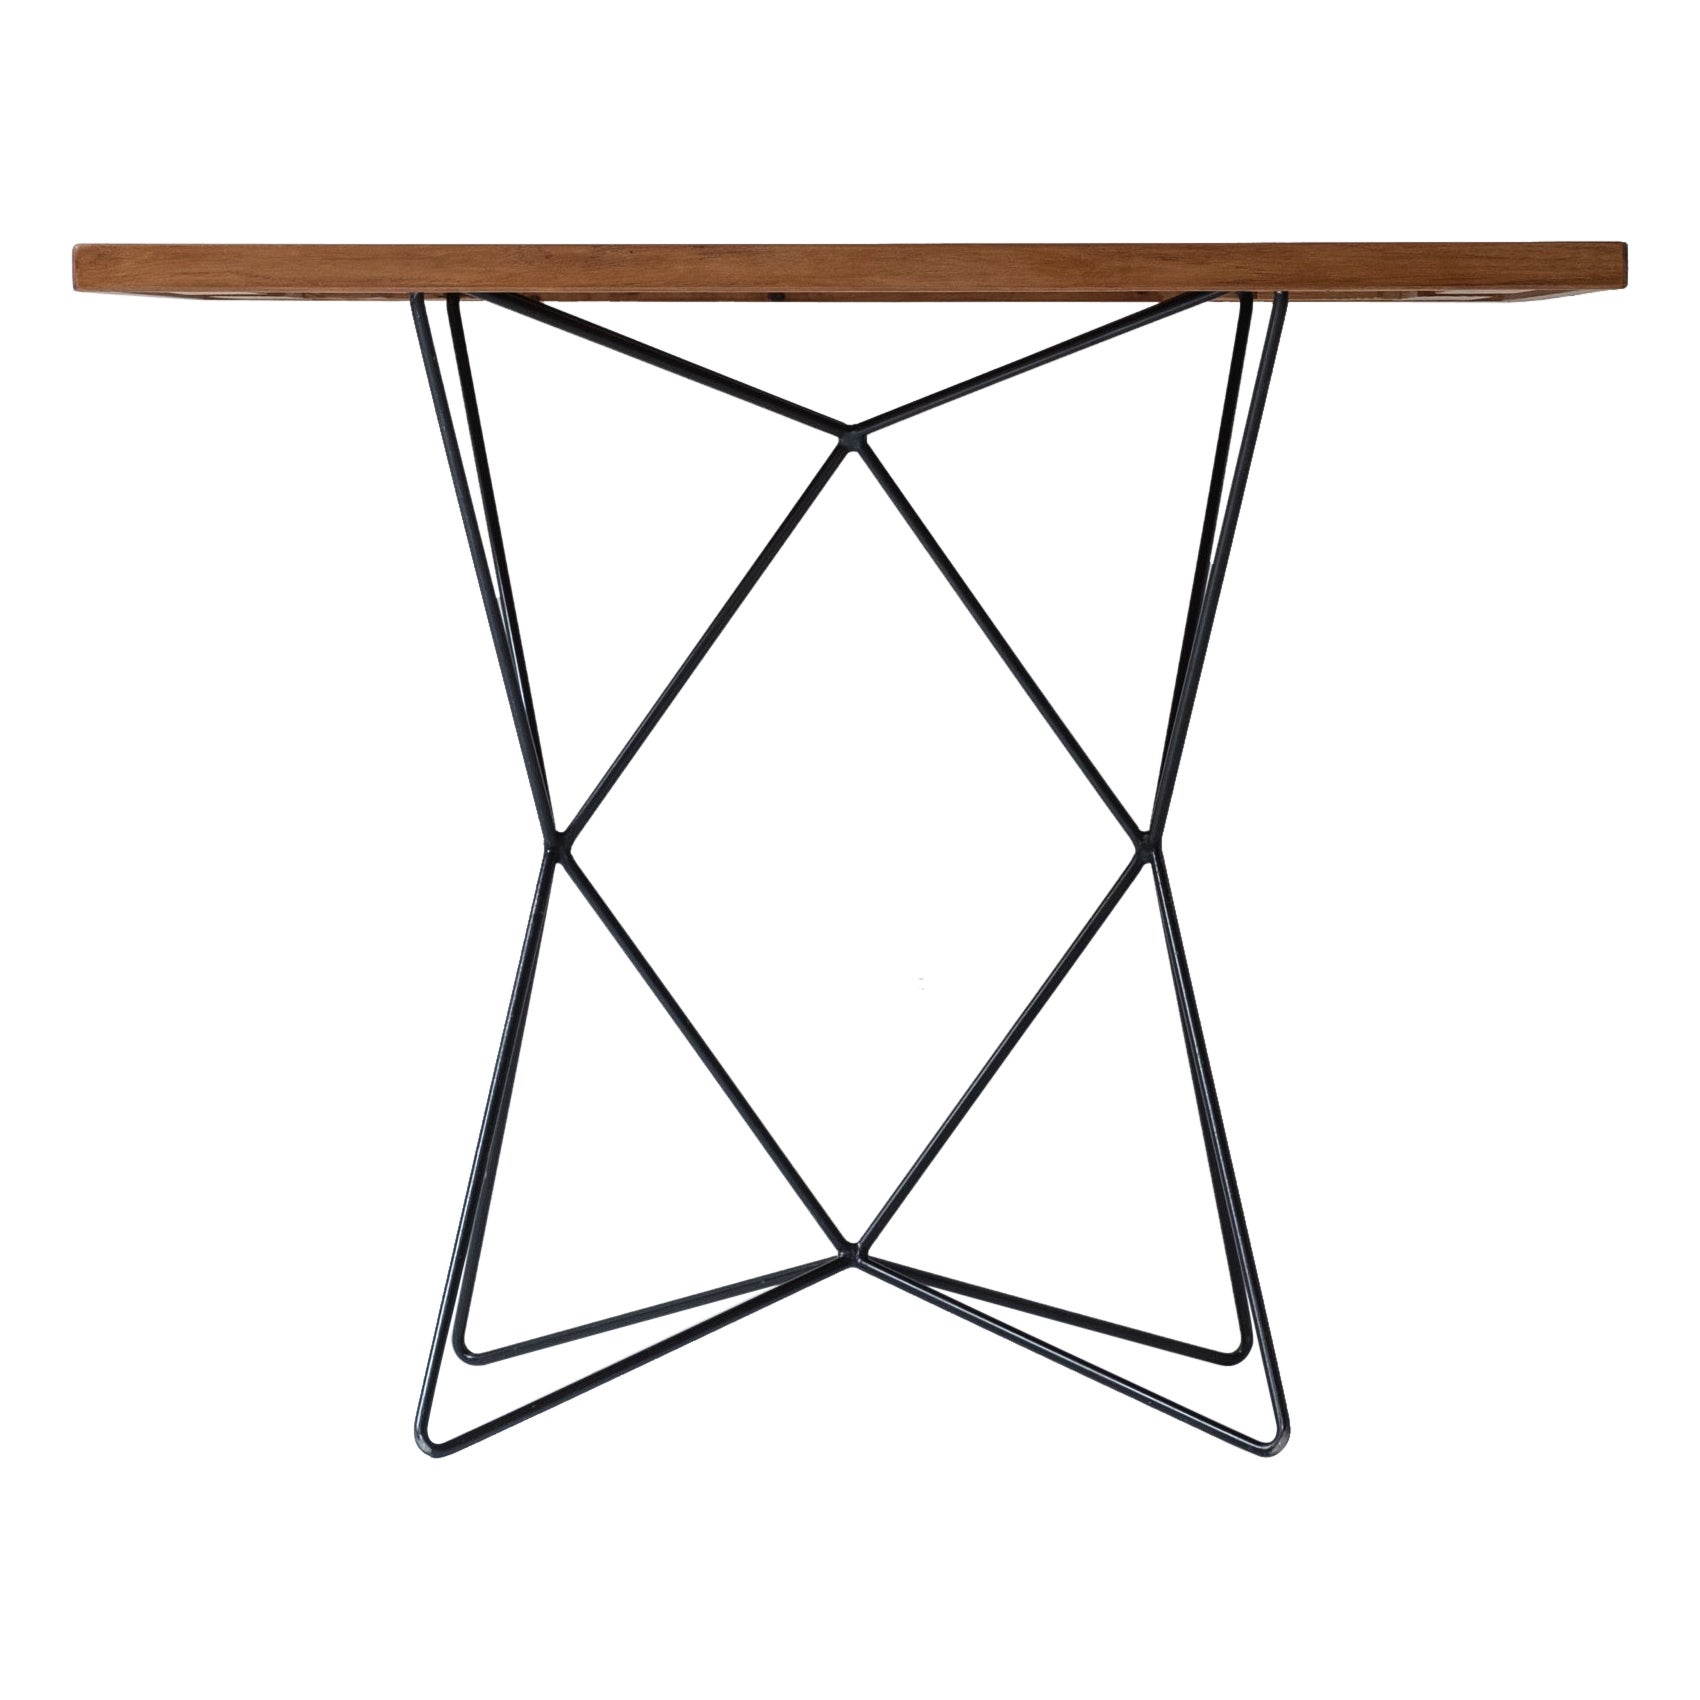 Rare A2 multi table by Bengt Johan Gullberg, Sweden 1950s. For Sale